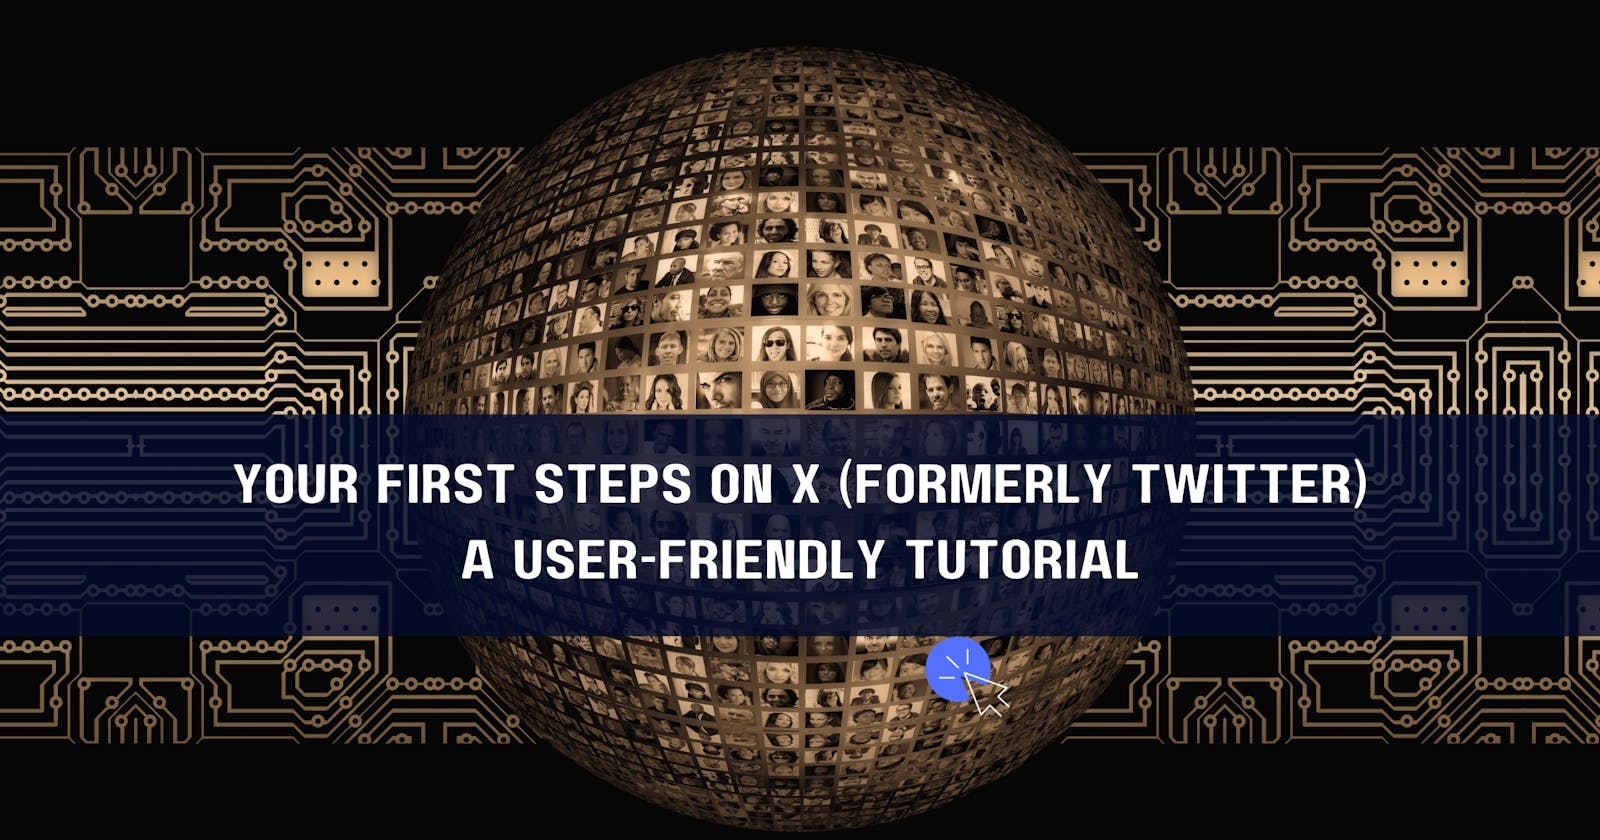 Your First Steps on X (formerly Twitter): A User-Friendly Tutorial